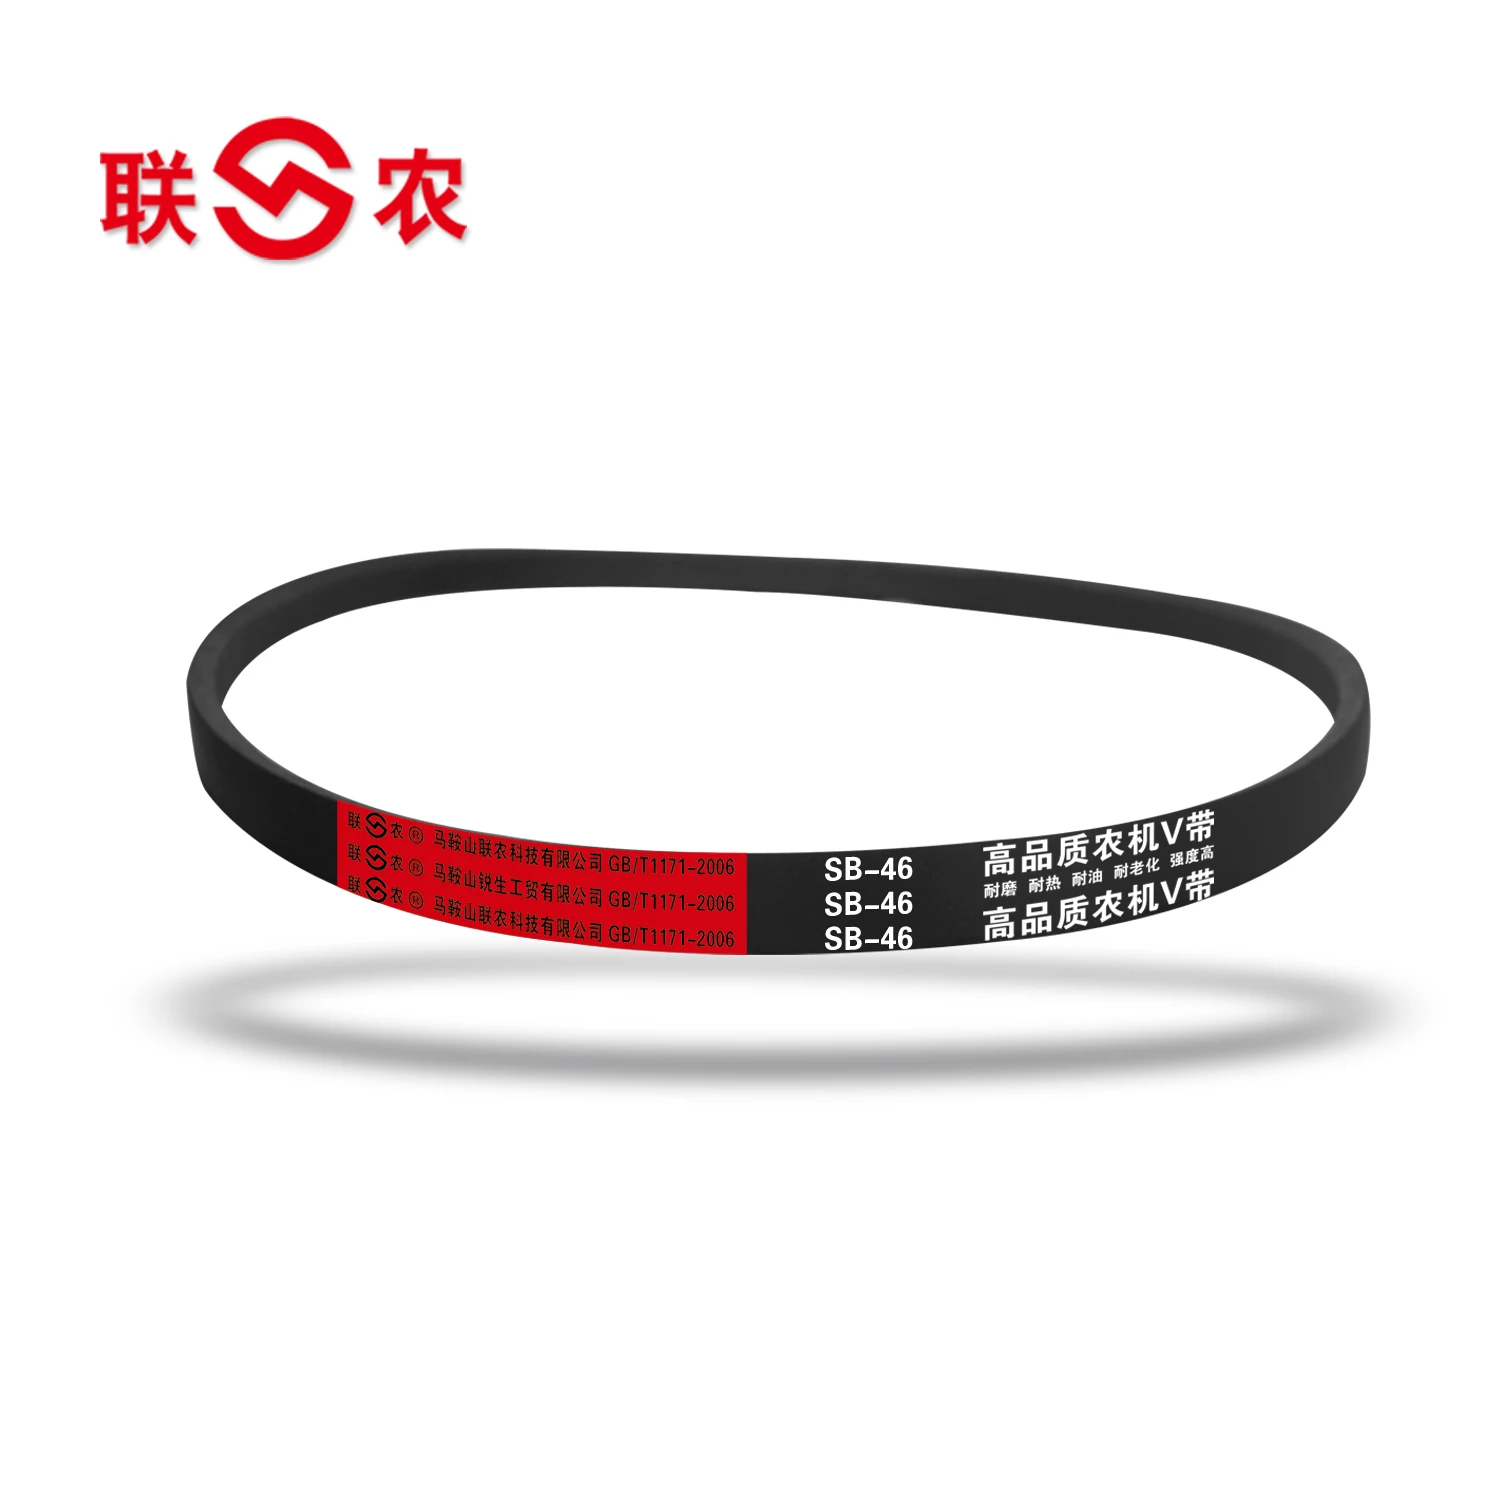 Newest v-belts for Zhejiang Zoomlion made in China